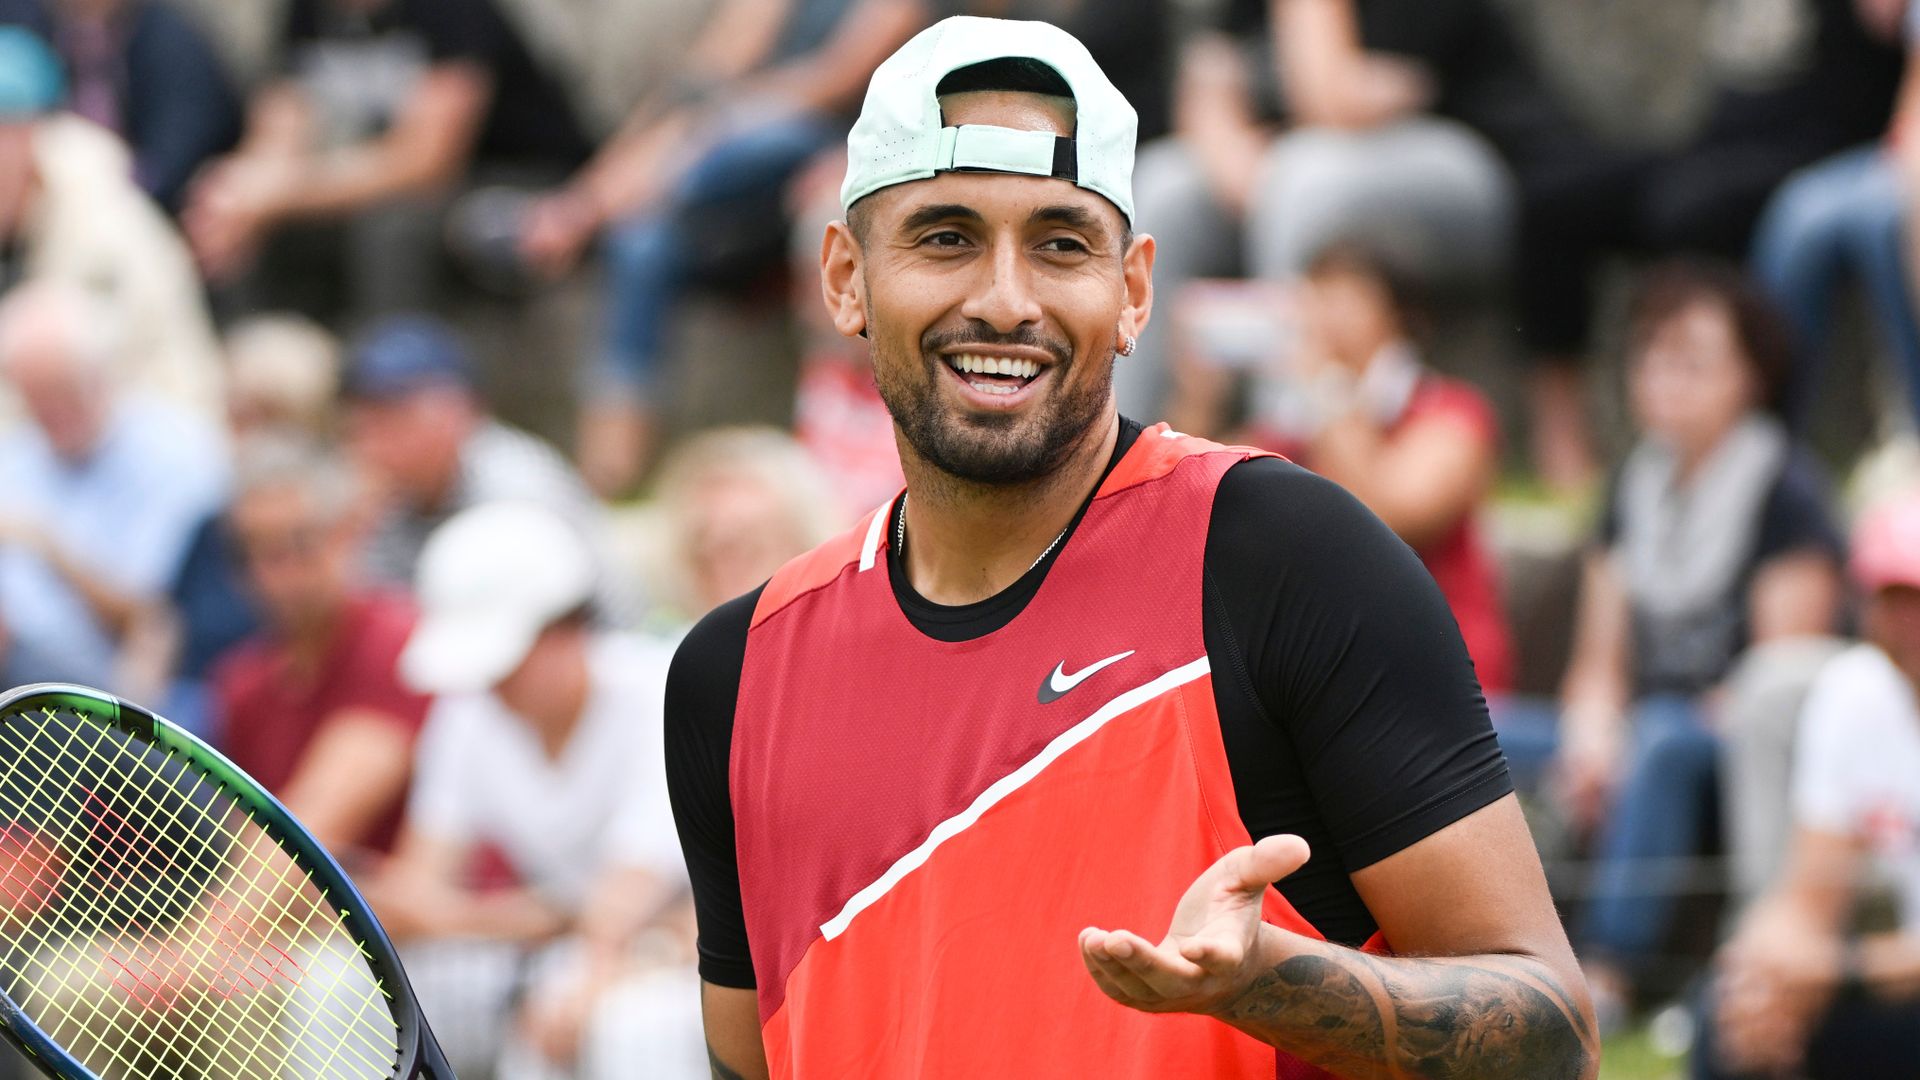 Kyrgios suffers abdominal injury I Beauty of game gone with off-court coaching